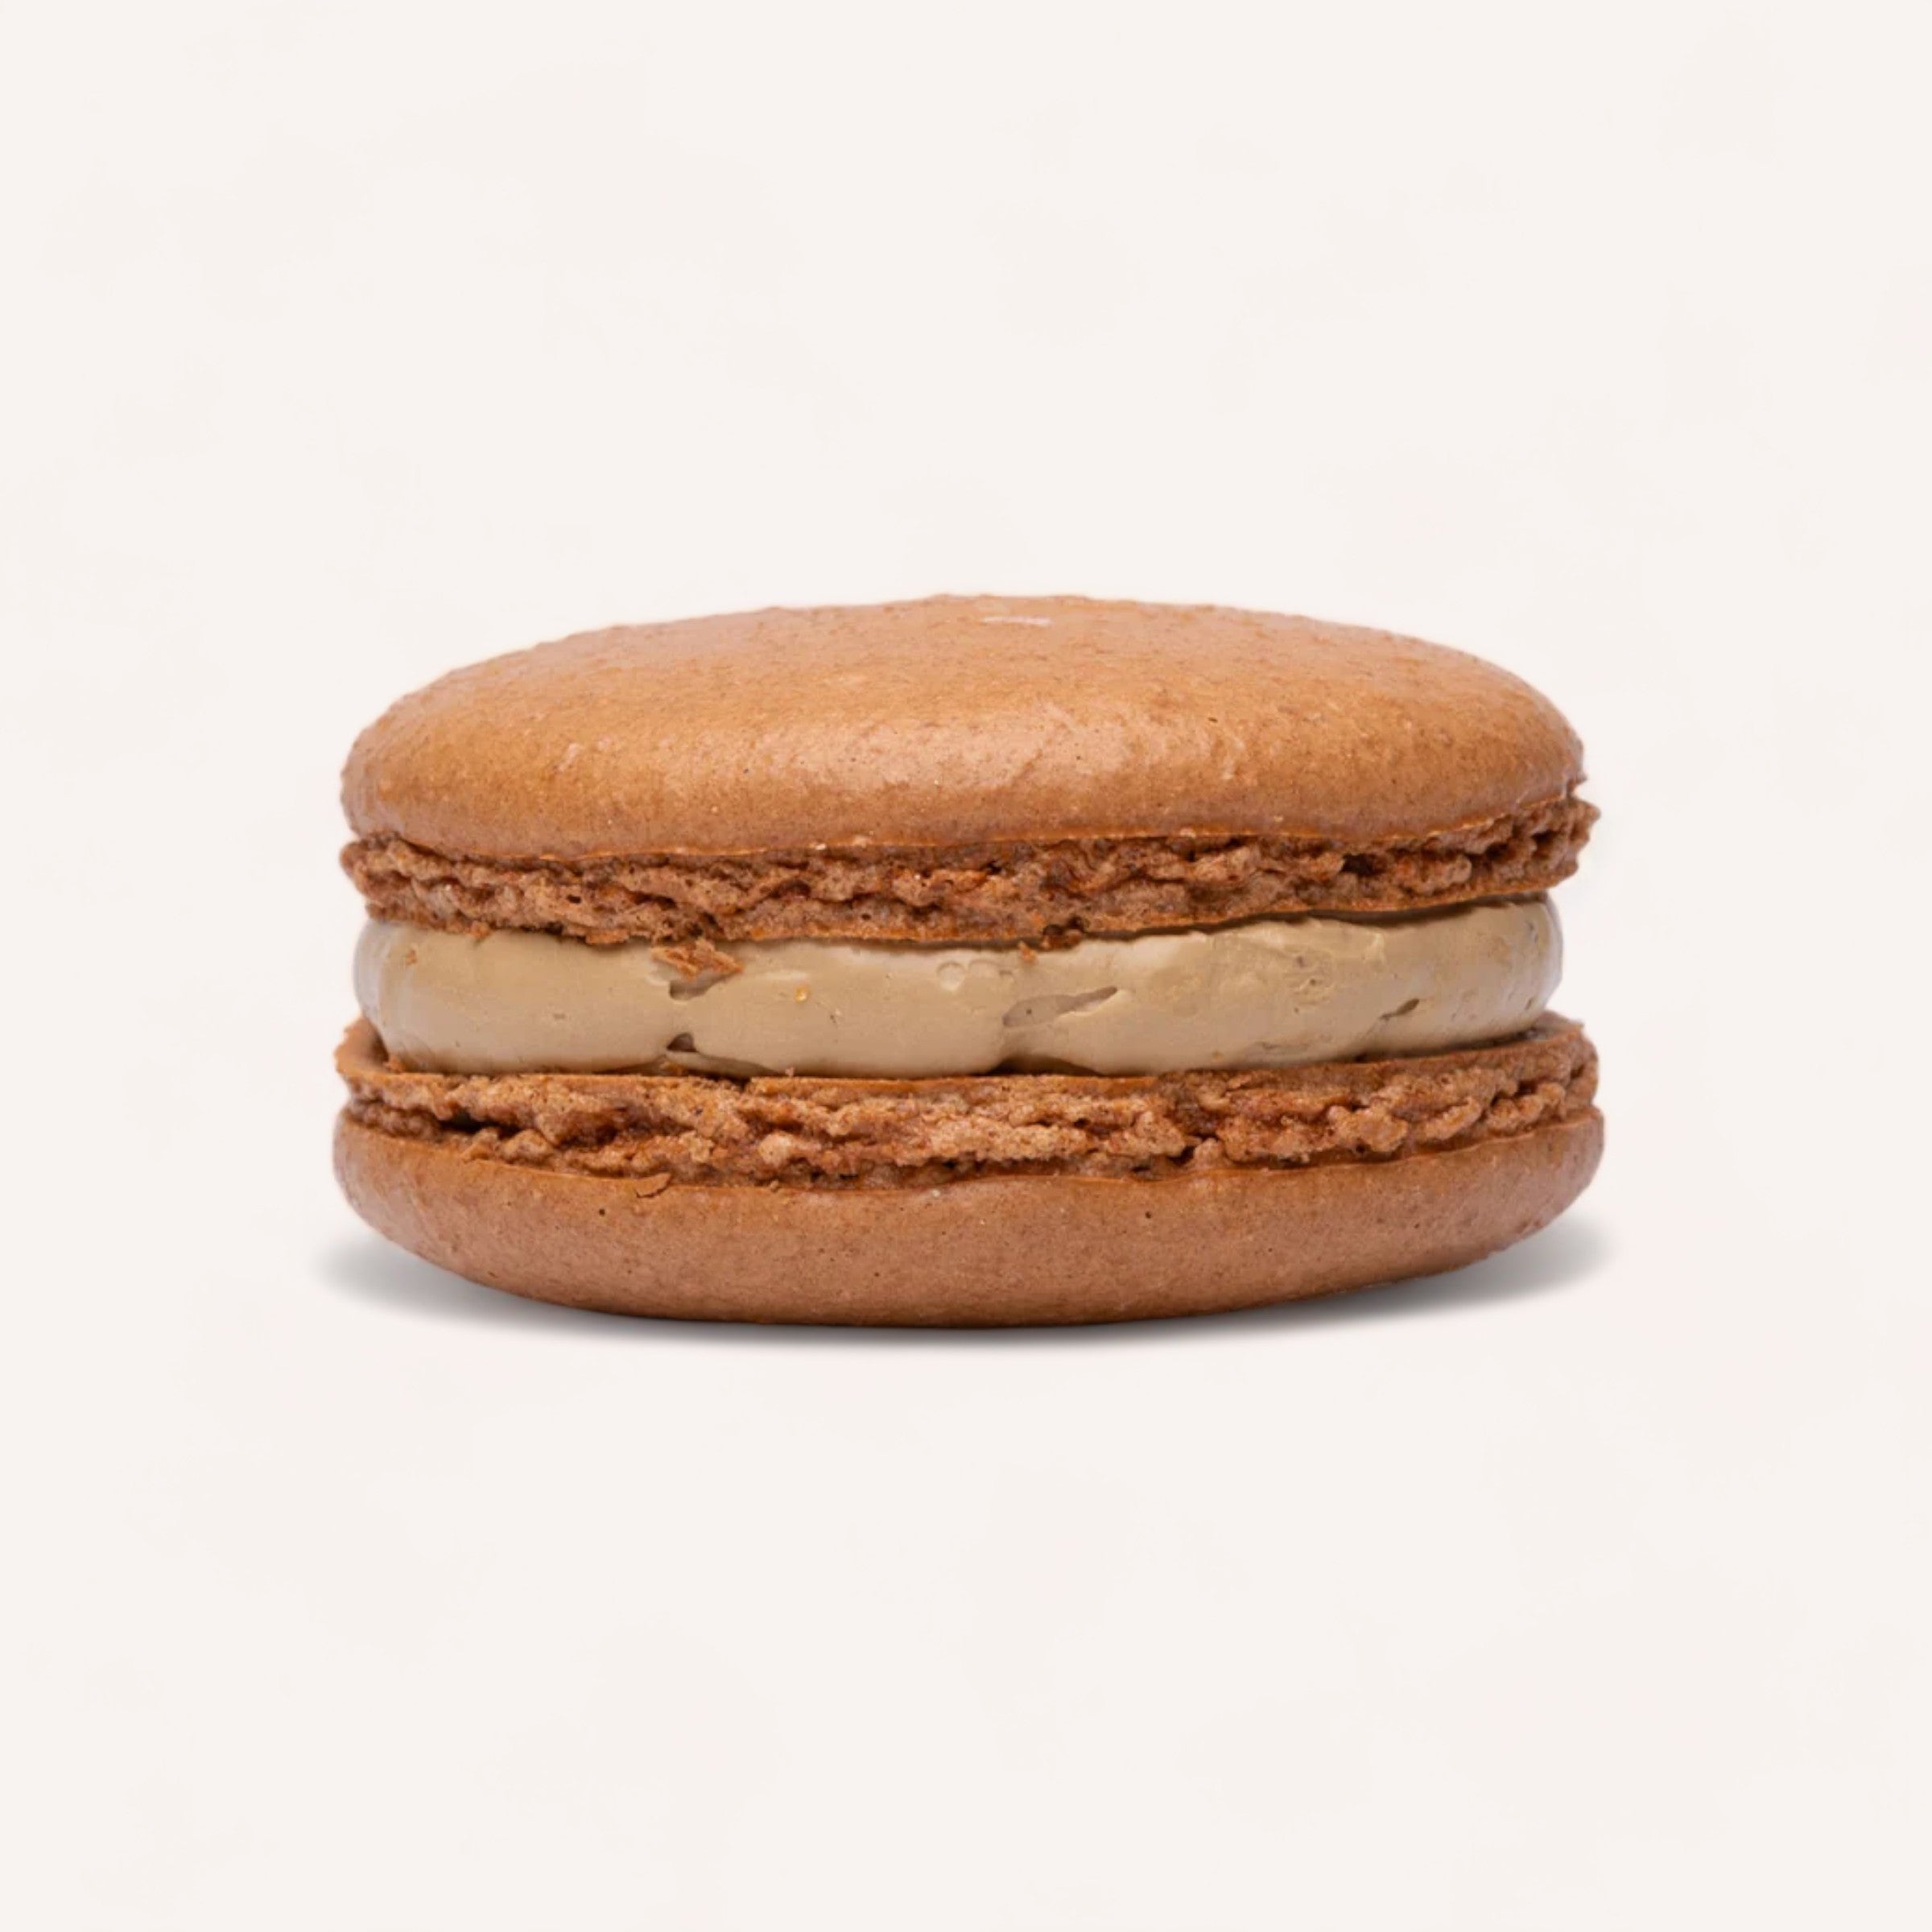 A single brown handmade Box of 12 Macarons by J'aime les Macarons with a creamy filling, isolated against a white background.